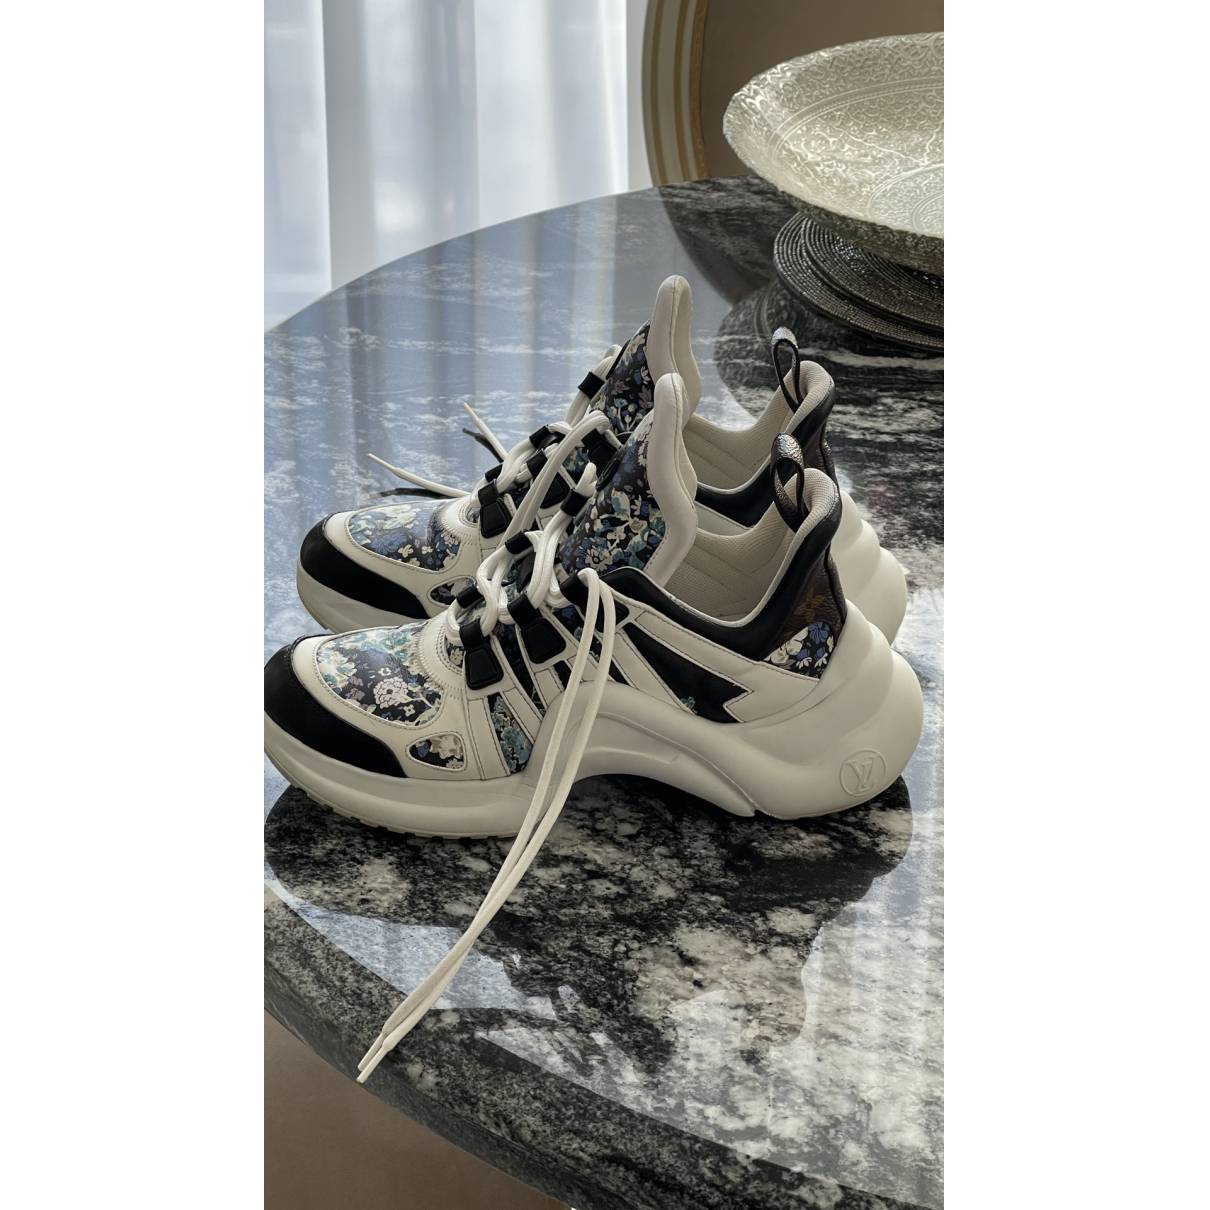 Louis Vuitton Black/White Neoprene and Leather Archlight Sneakers